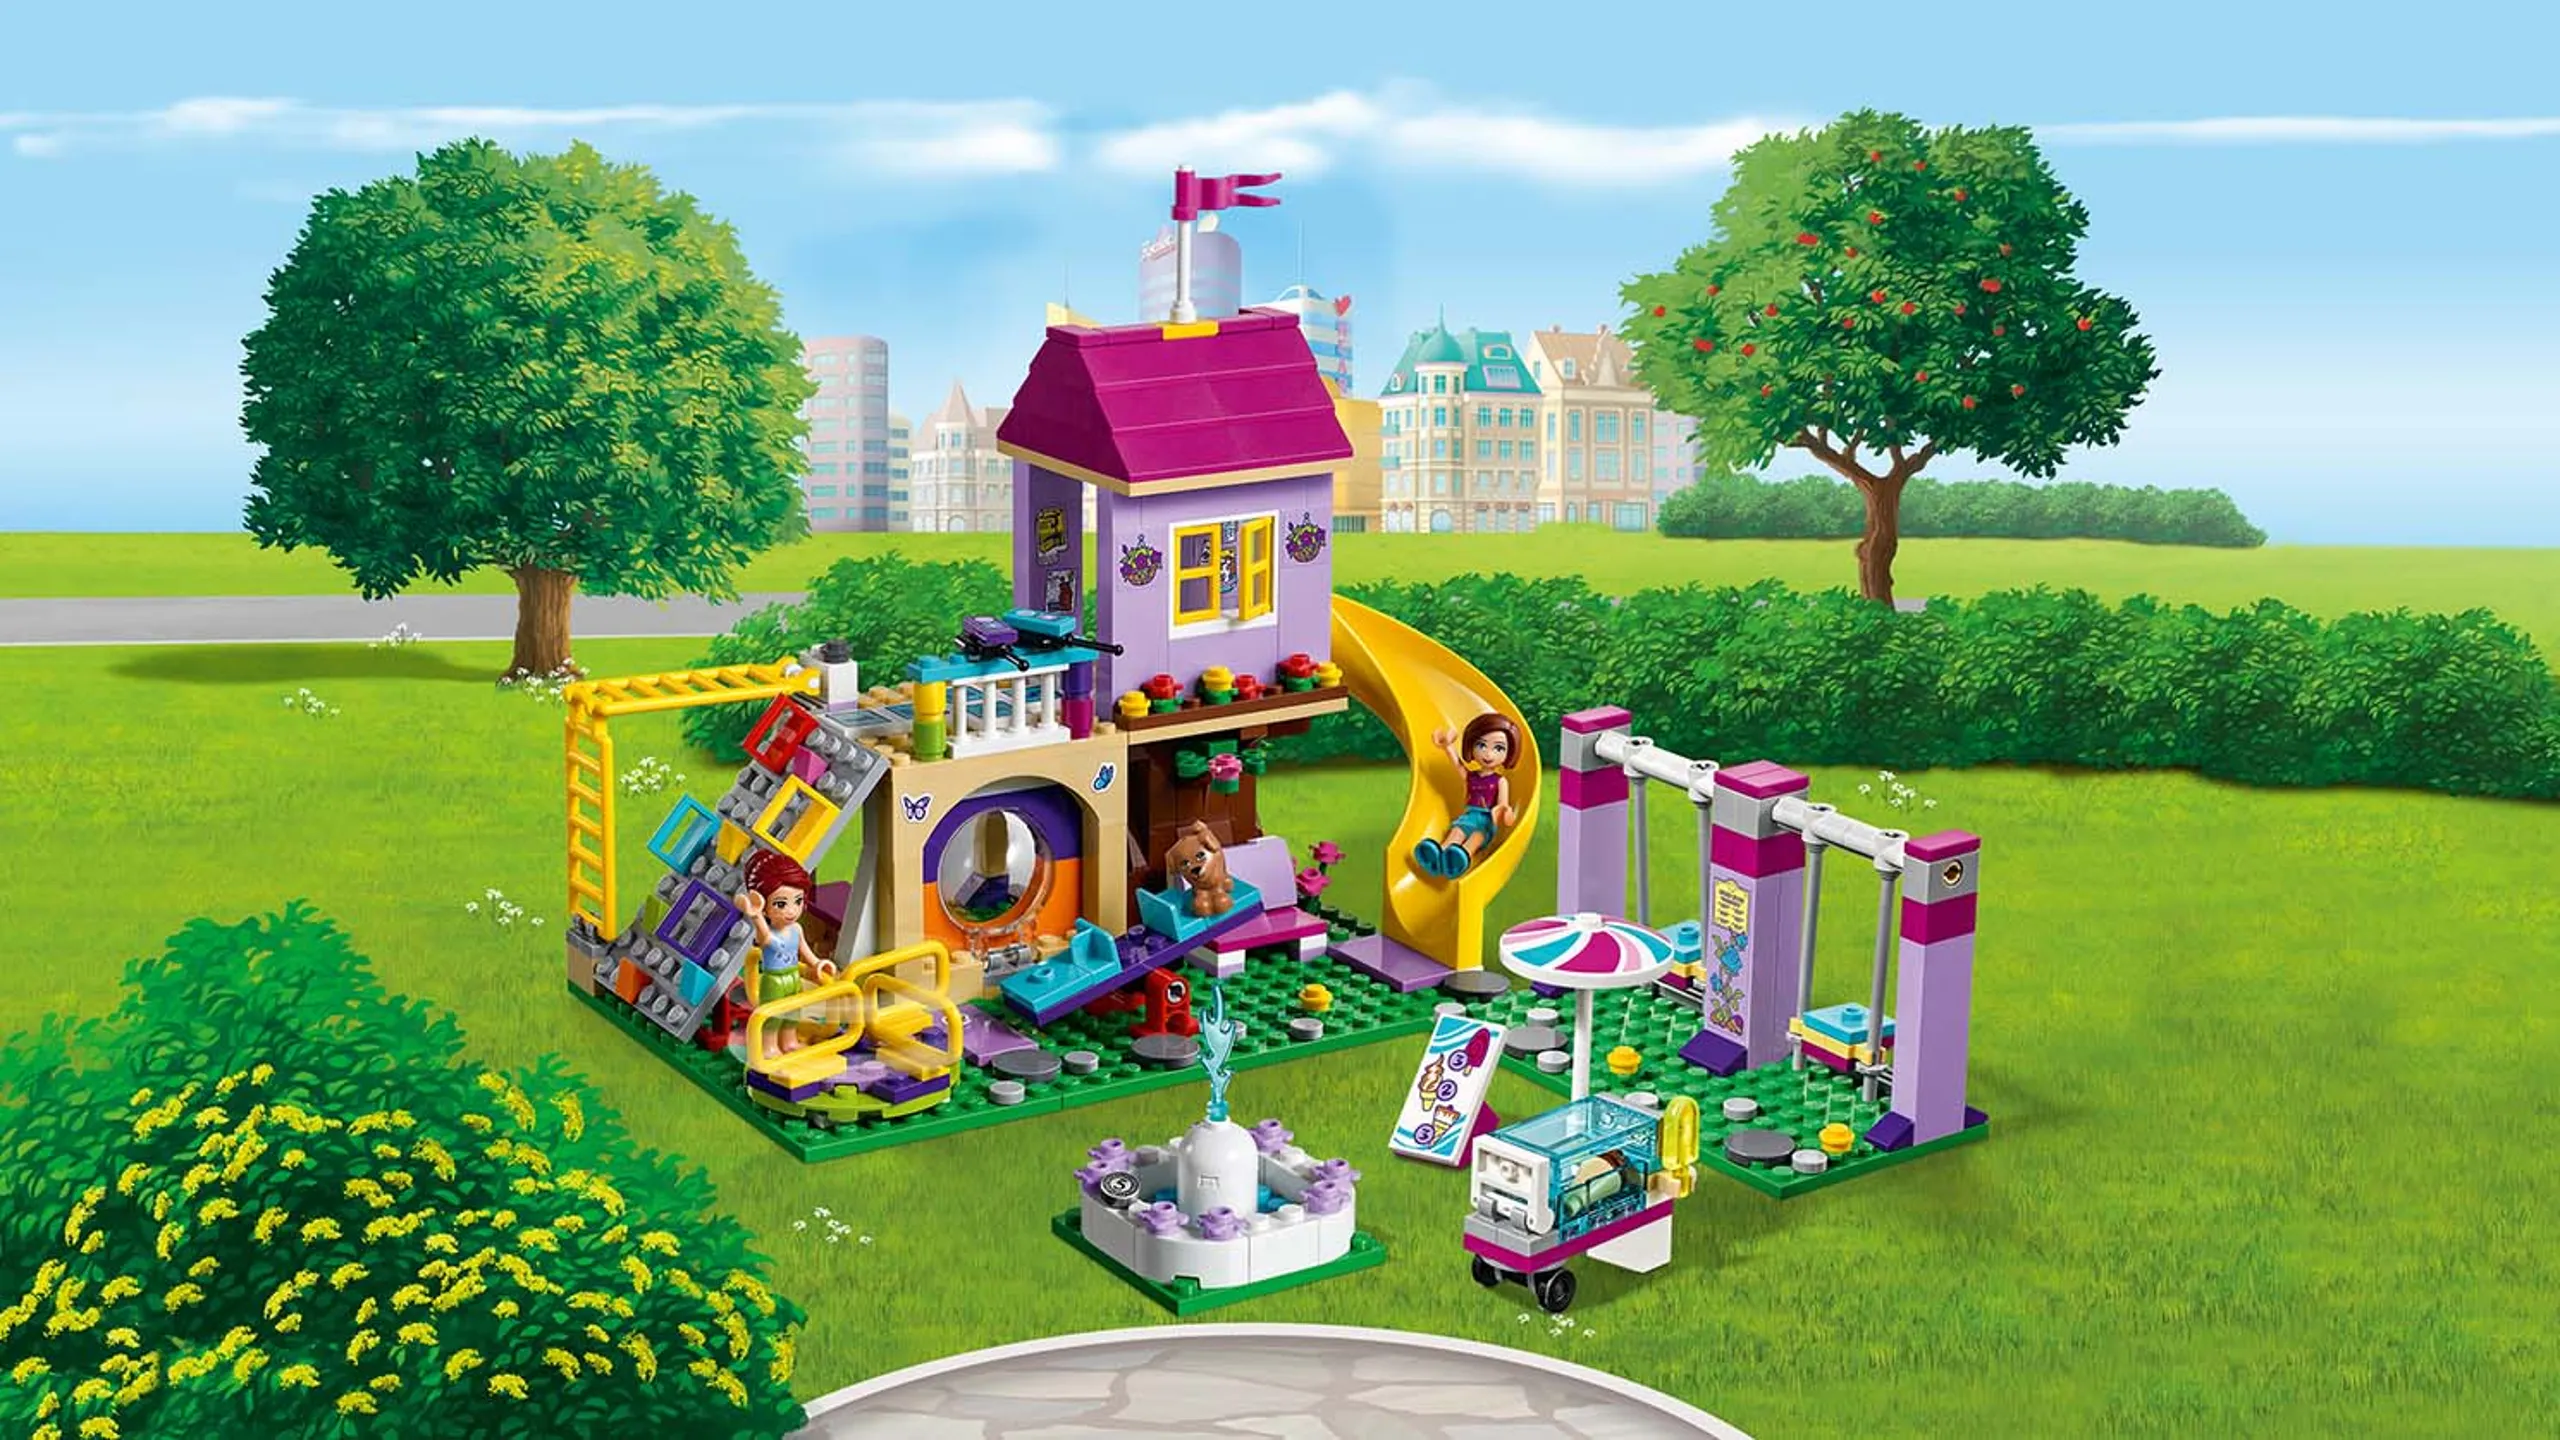 LEGO Friends - 41325 Heartlake City Playground - Sienna and Mia are on the playground with their puppy where they can take a ride on the slide, the swings, the seesaw, the carousel, the climbing wall, have fun and take a break with an ice cream.